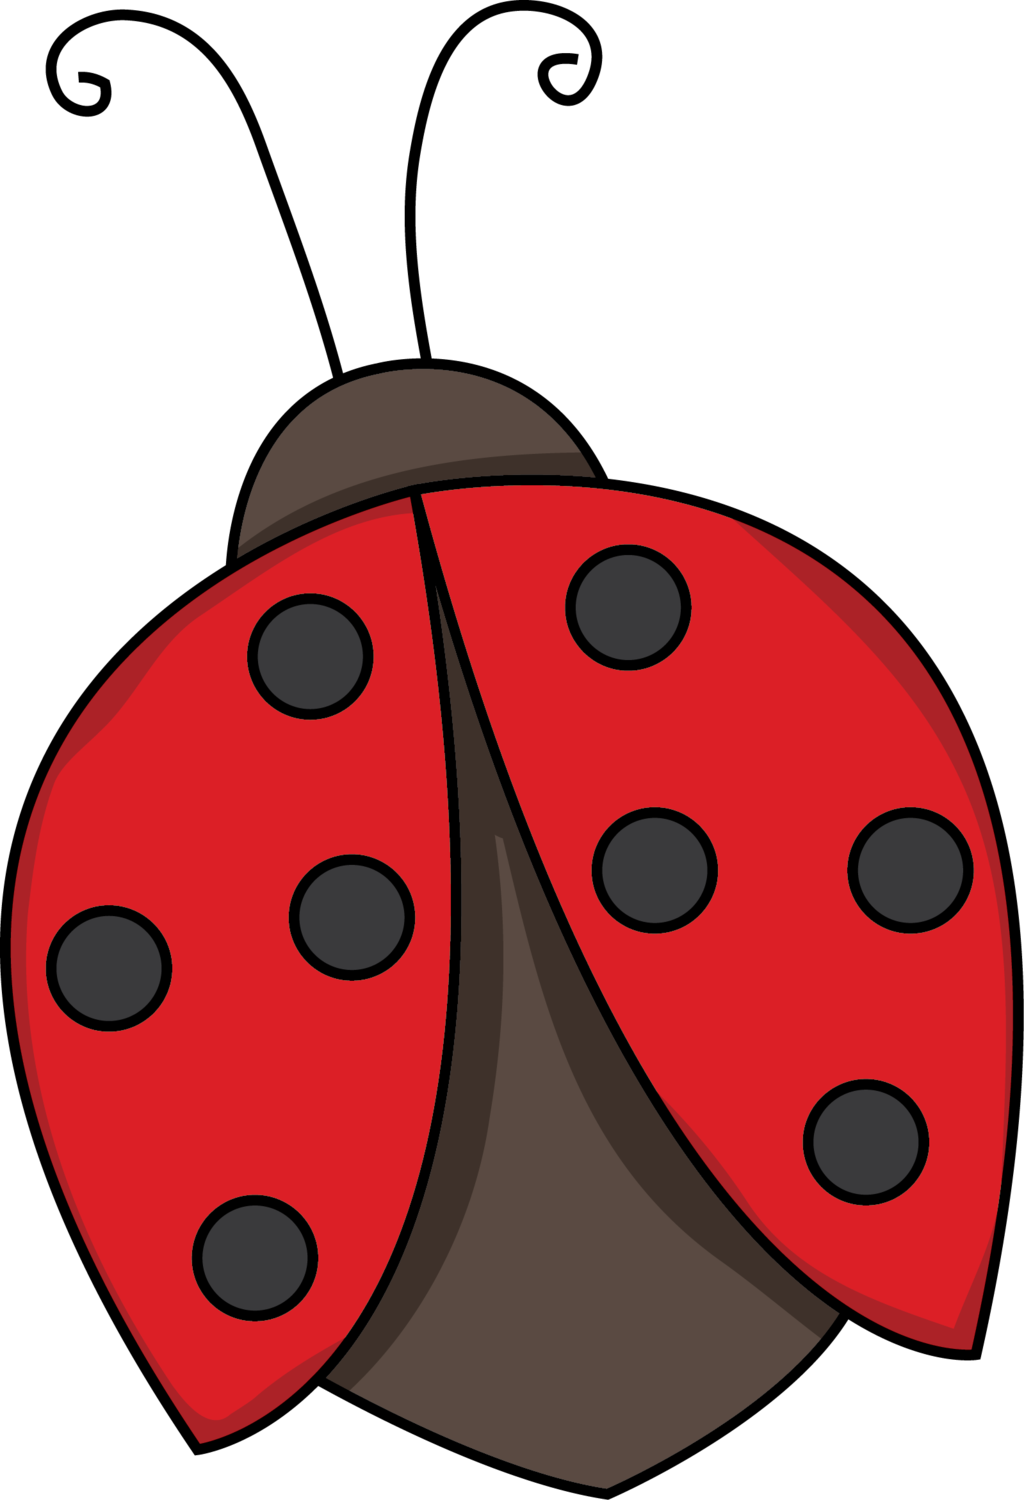 ladybug-outline-related-keywords-clip-art-wikiclipart